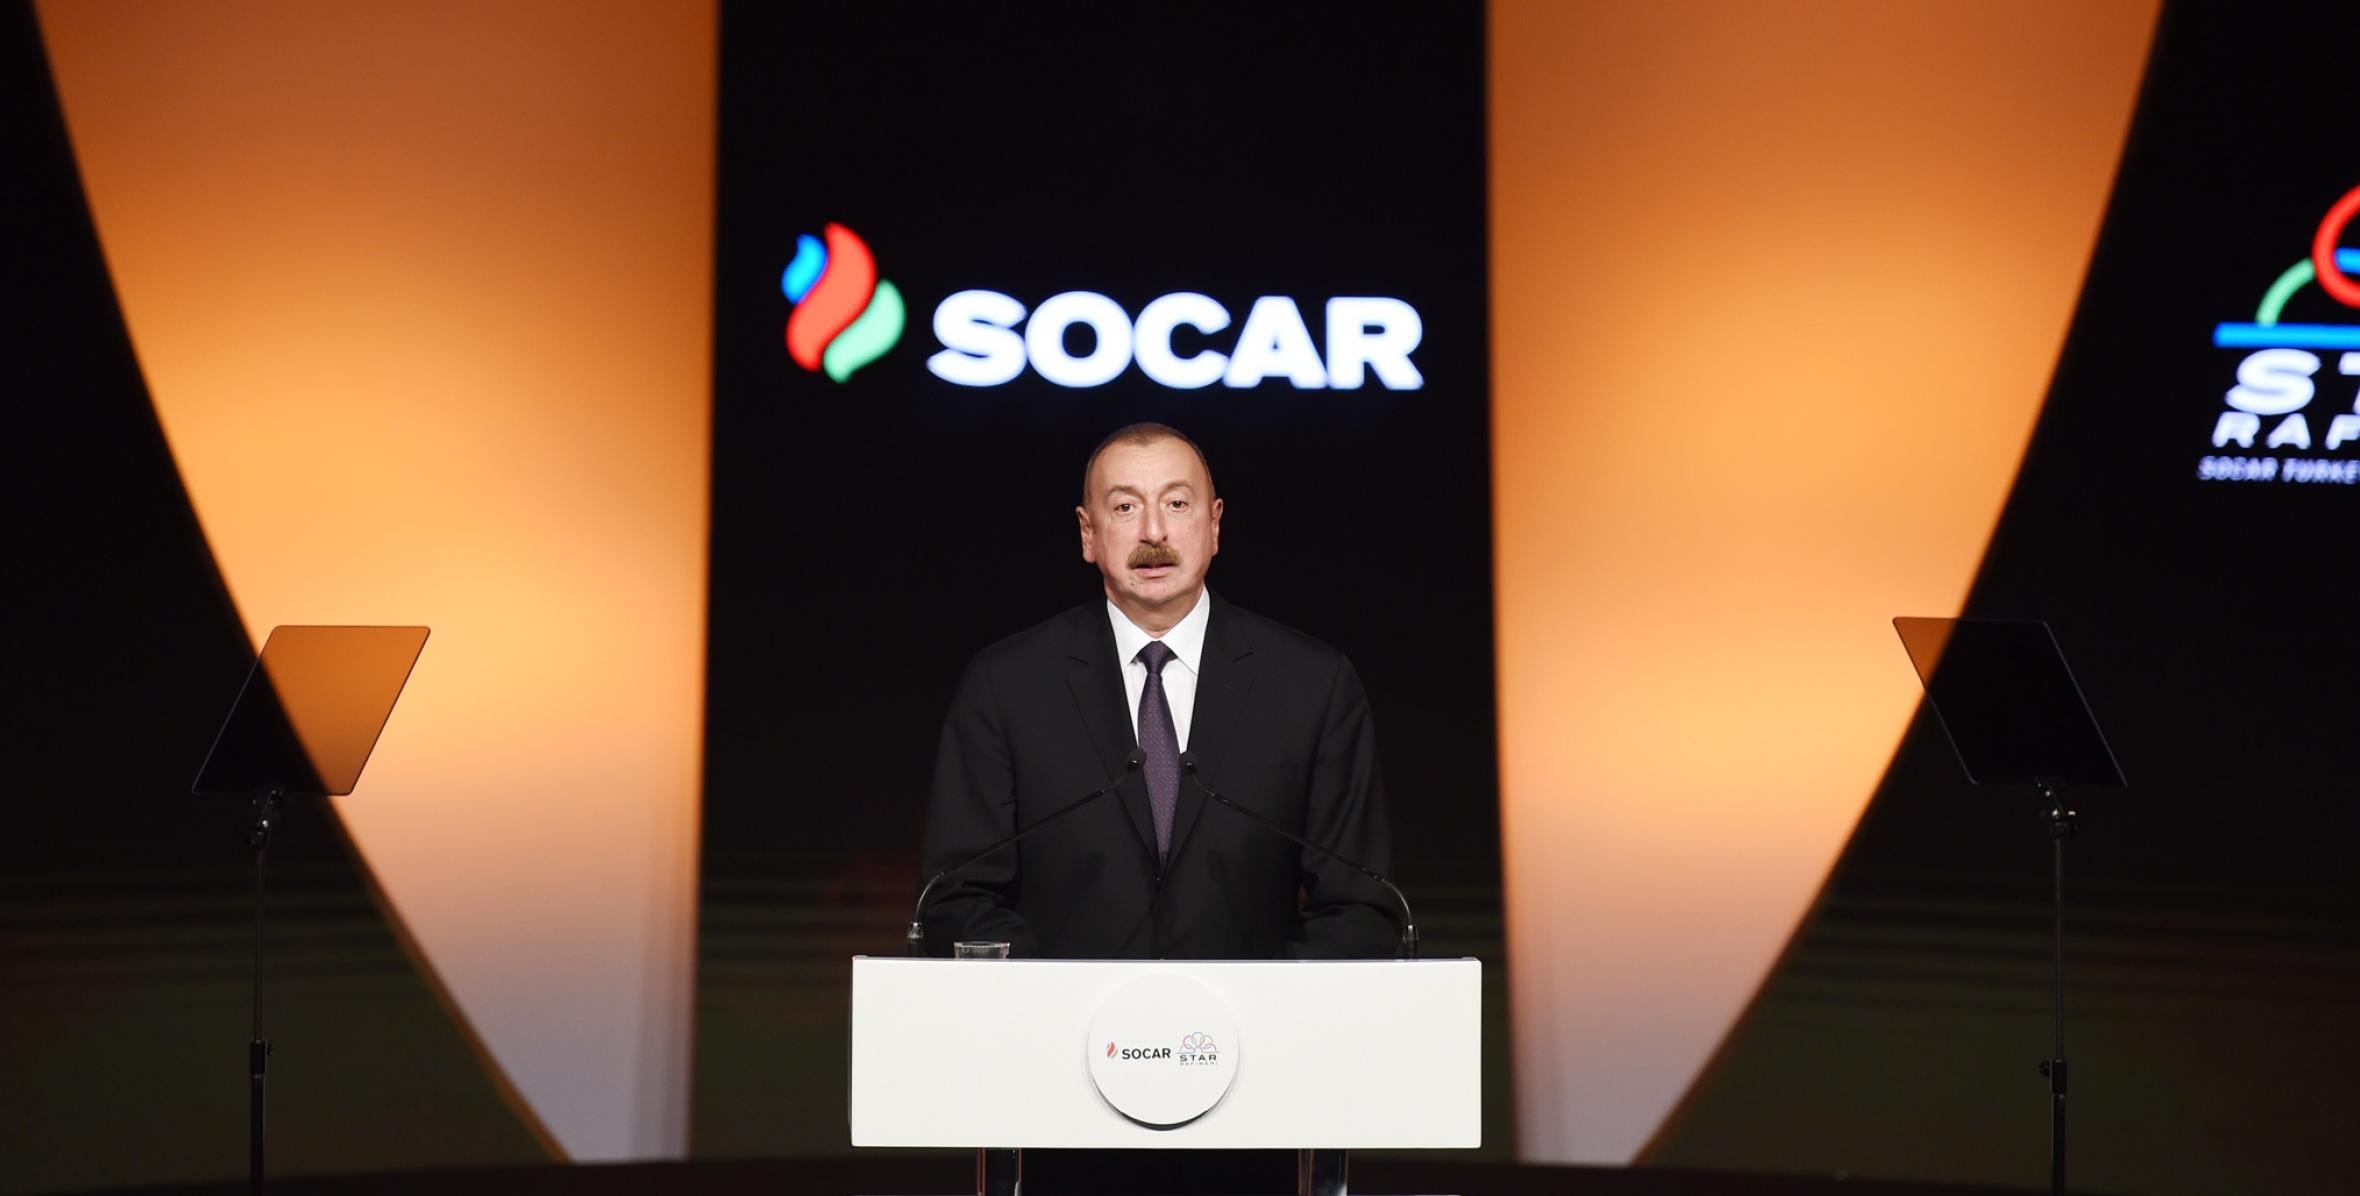 Speech by Ilham Aliyev at the opening ceremony of the Star Oil Refinery